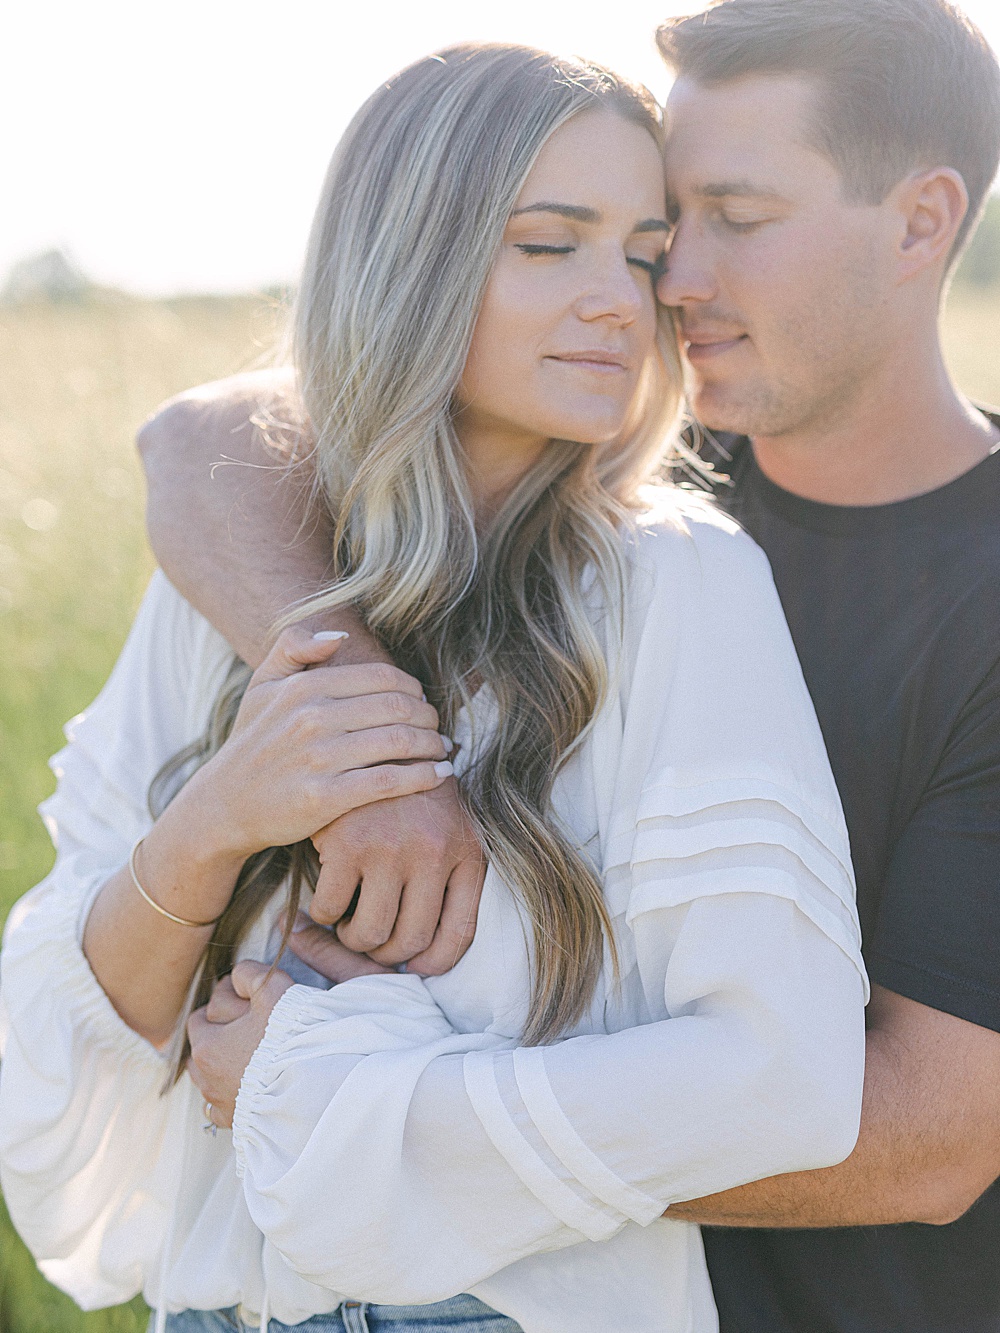 Altanta engagement photography in a field captured by Film Photographer Laura Watson